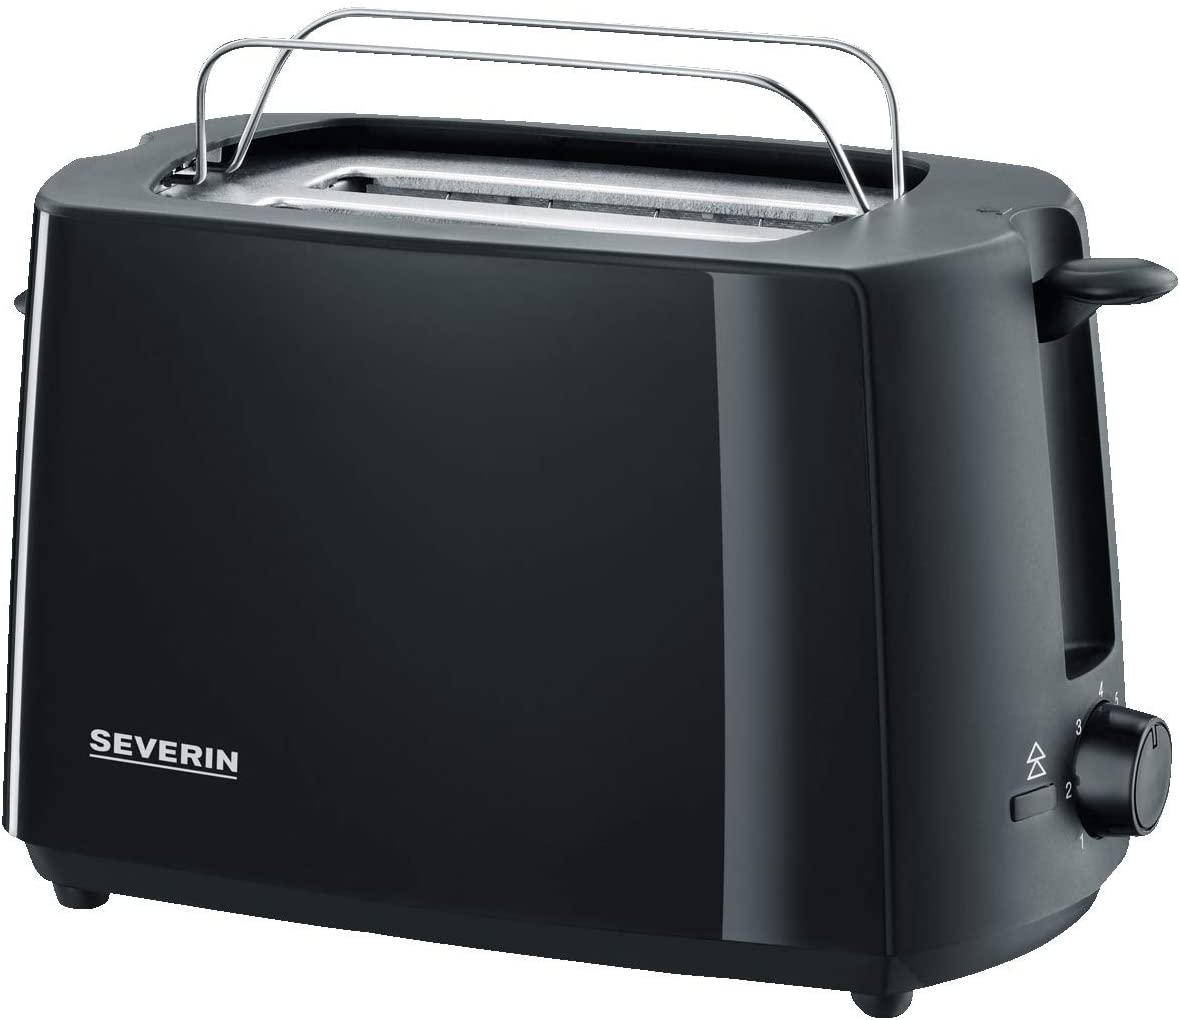 AT2287 Severin Unisex Automatic Toaster, 000